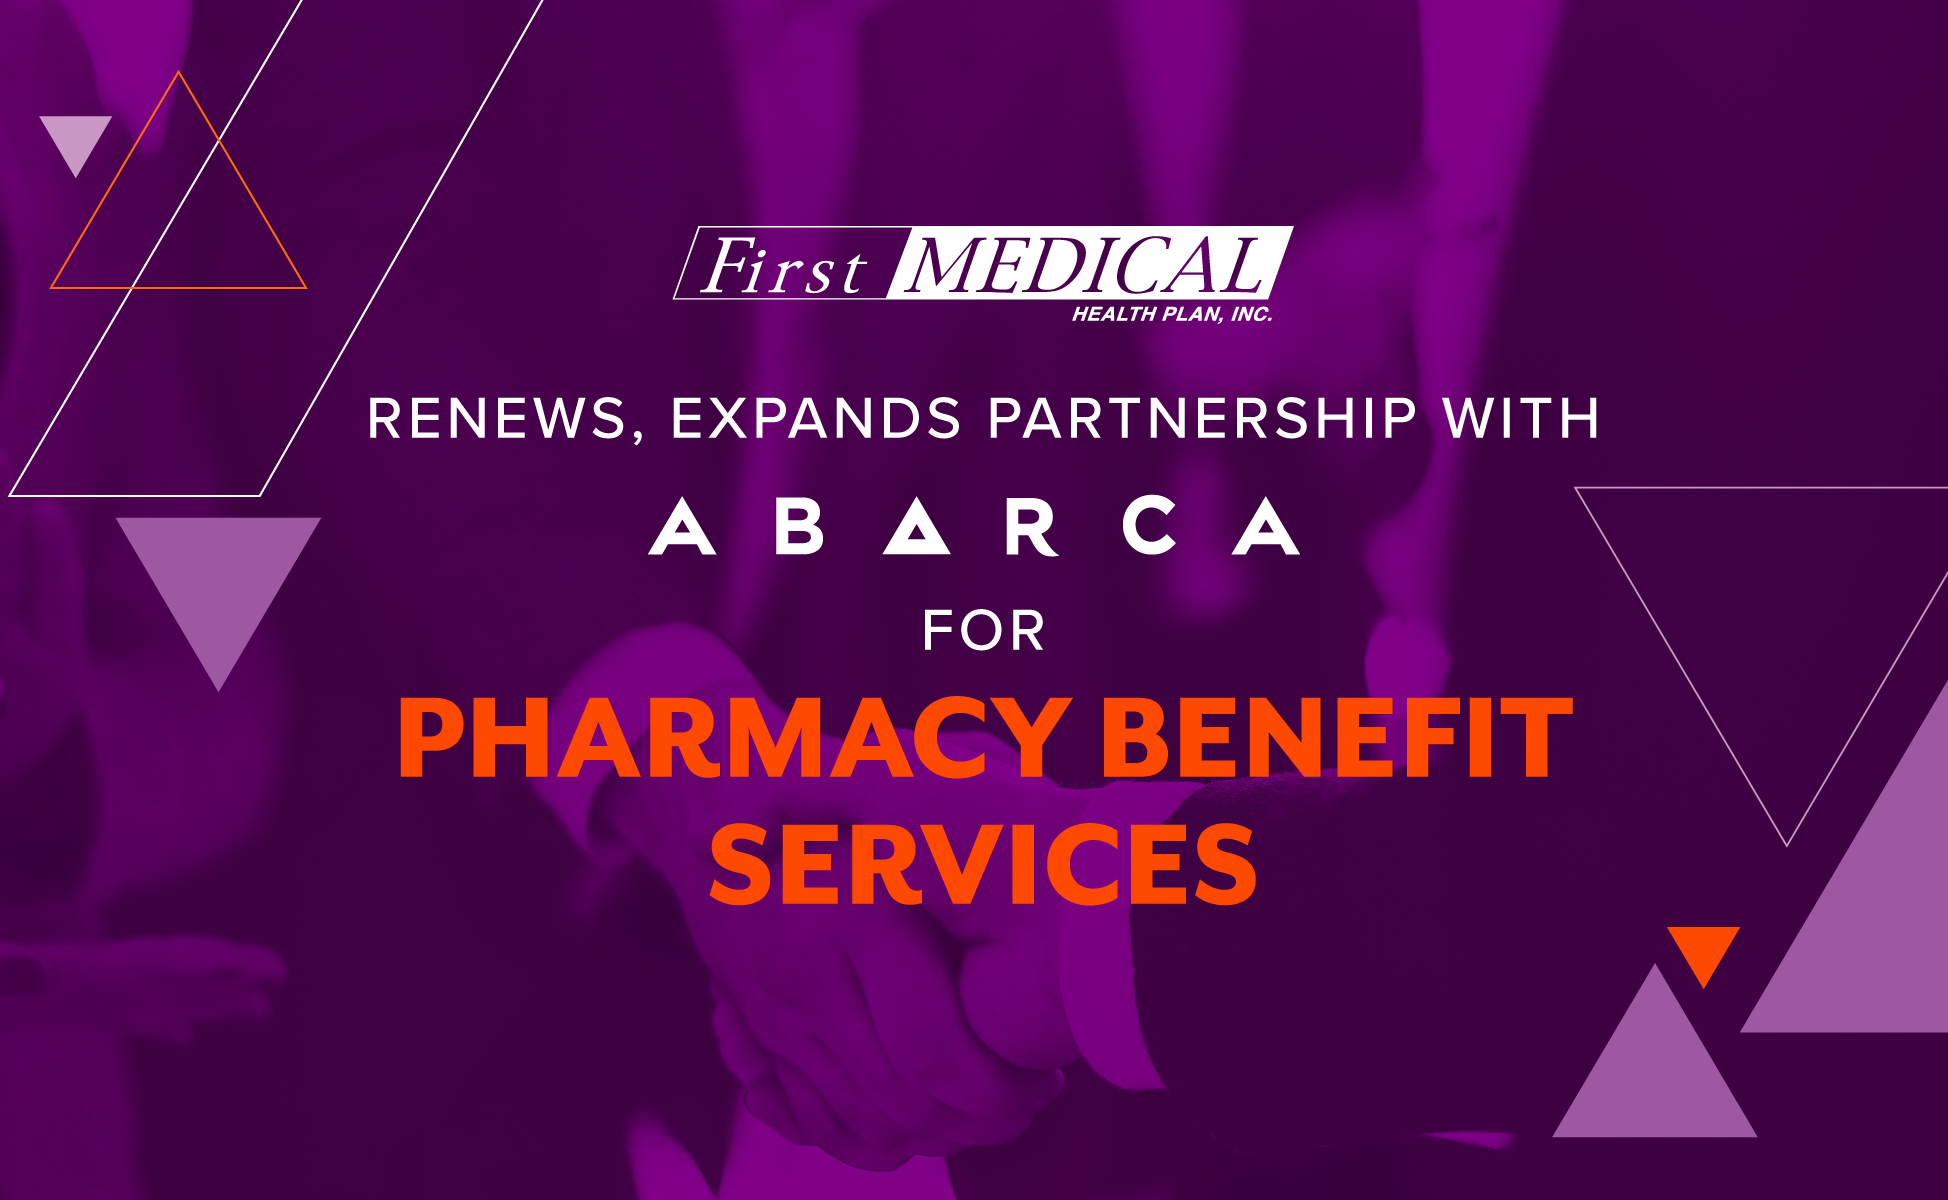 FIRST MEDICAL RENEWS & EXPANDS PARTNERSHIP WITH ABARCA FOR PHARMACY BENEFIT SERVICES